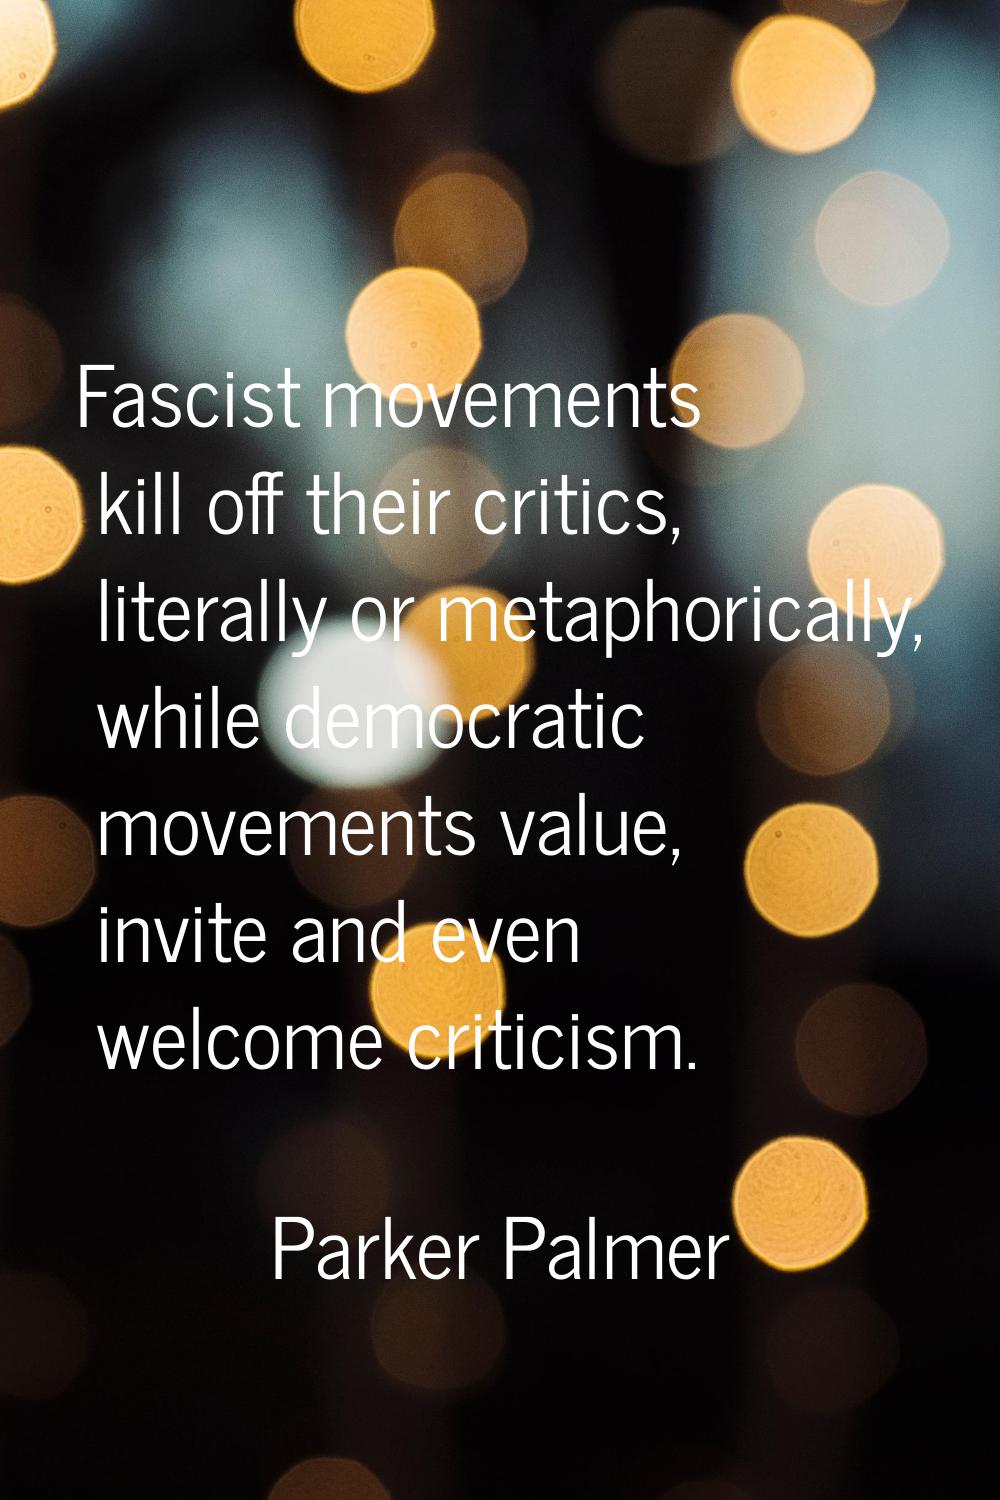 Fascist movements kill off their critics, literally or metaphorically, while democratic movements v